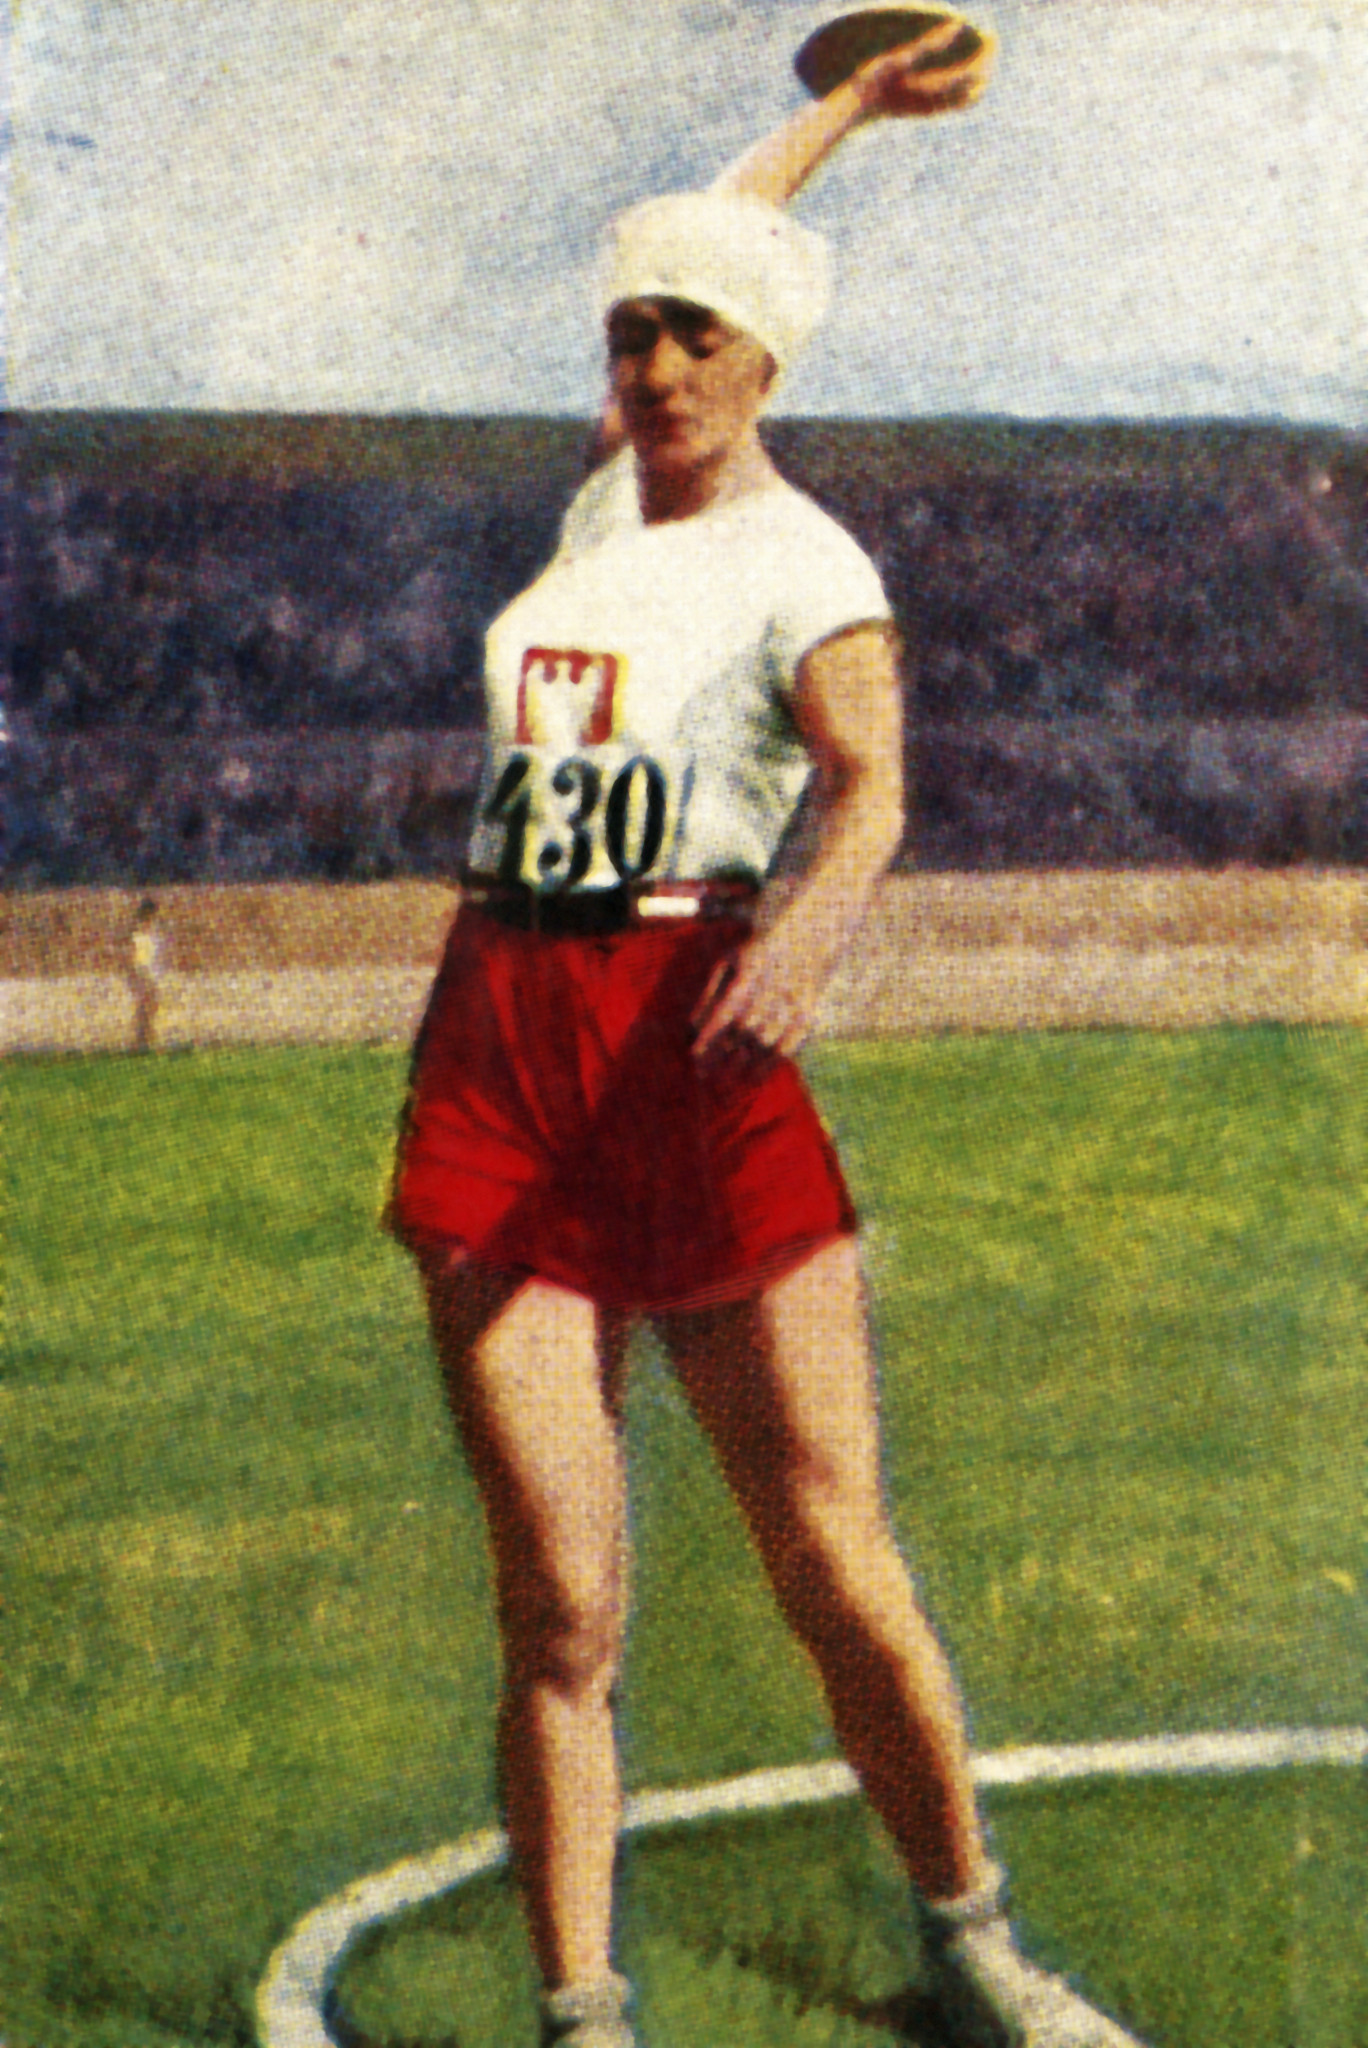 Poland's first Olympic gold medallist, Halina Konopacka, winner of the discus at Amsterdam 1928, was among the top athletes who started their careers in the country's university sports system ©Getty Images